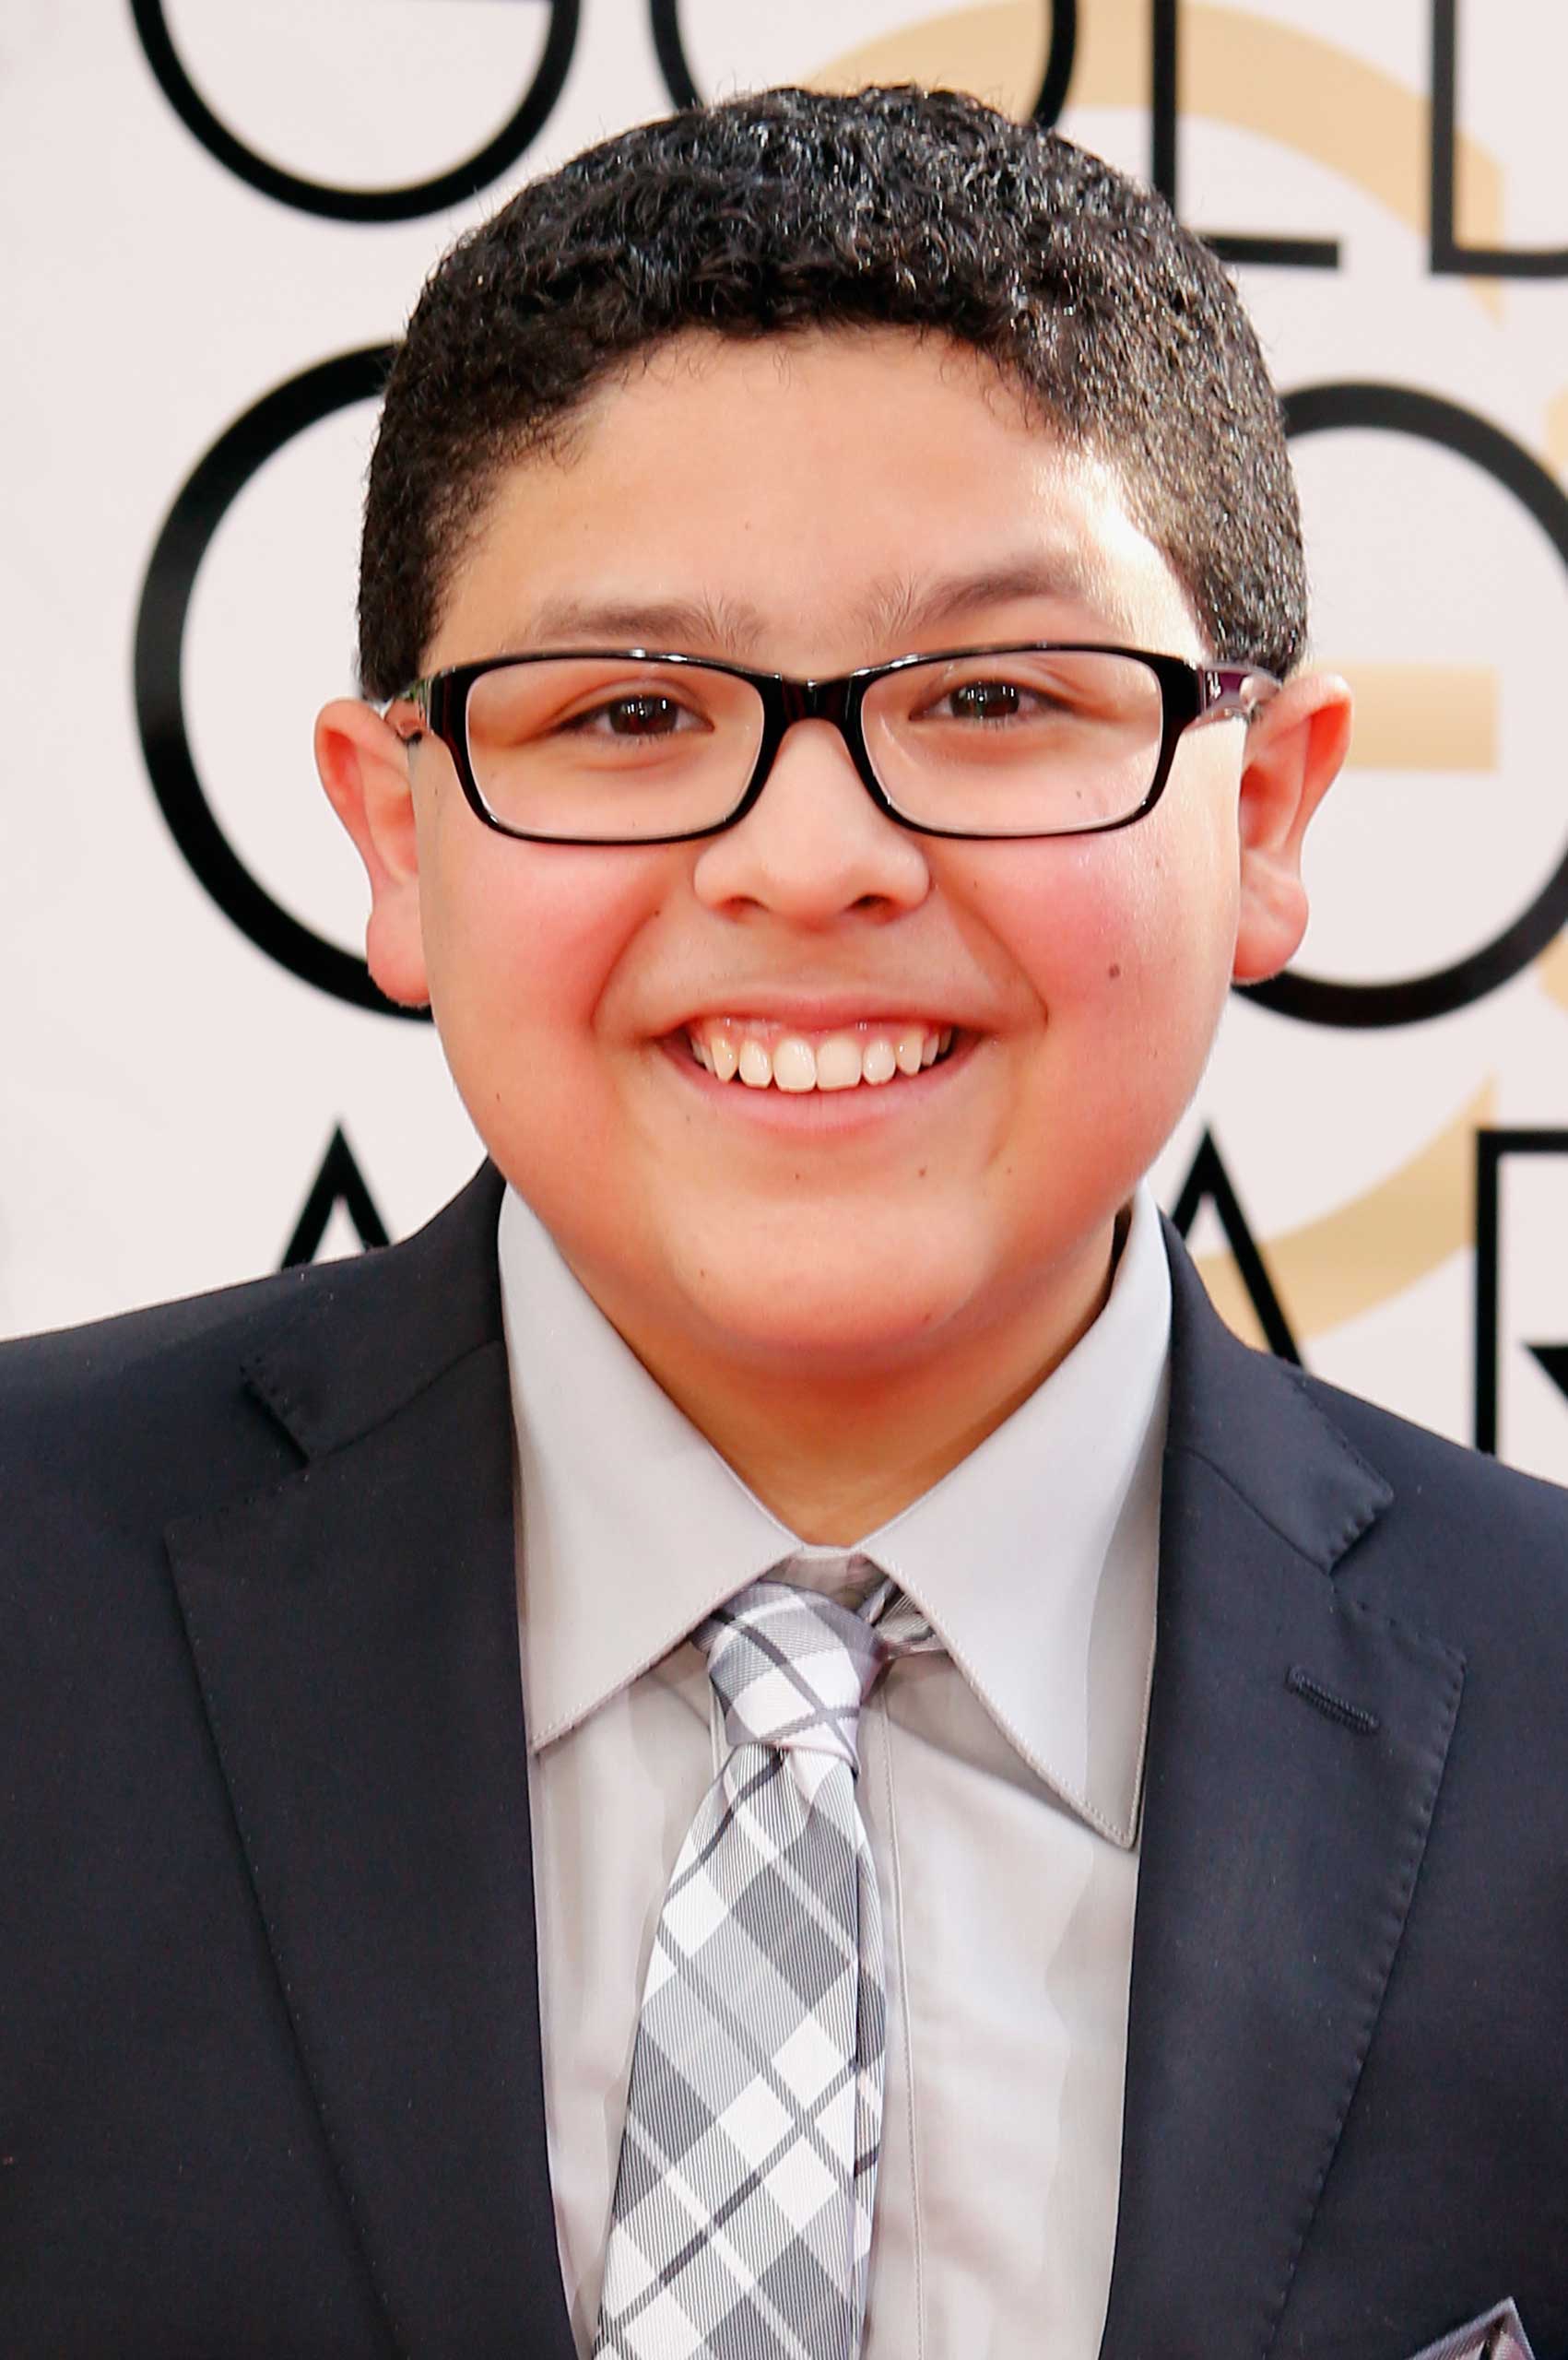 Actor Rico Rodriguez arrives to the 71st Annual Golden Globe Awards held at the Beverly Hilton Hotel on January 12, 2014 -- (Photo by Trae Patton/NBC/NBC via Getty Images)